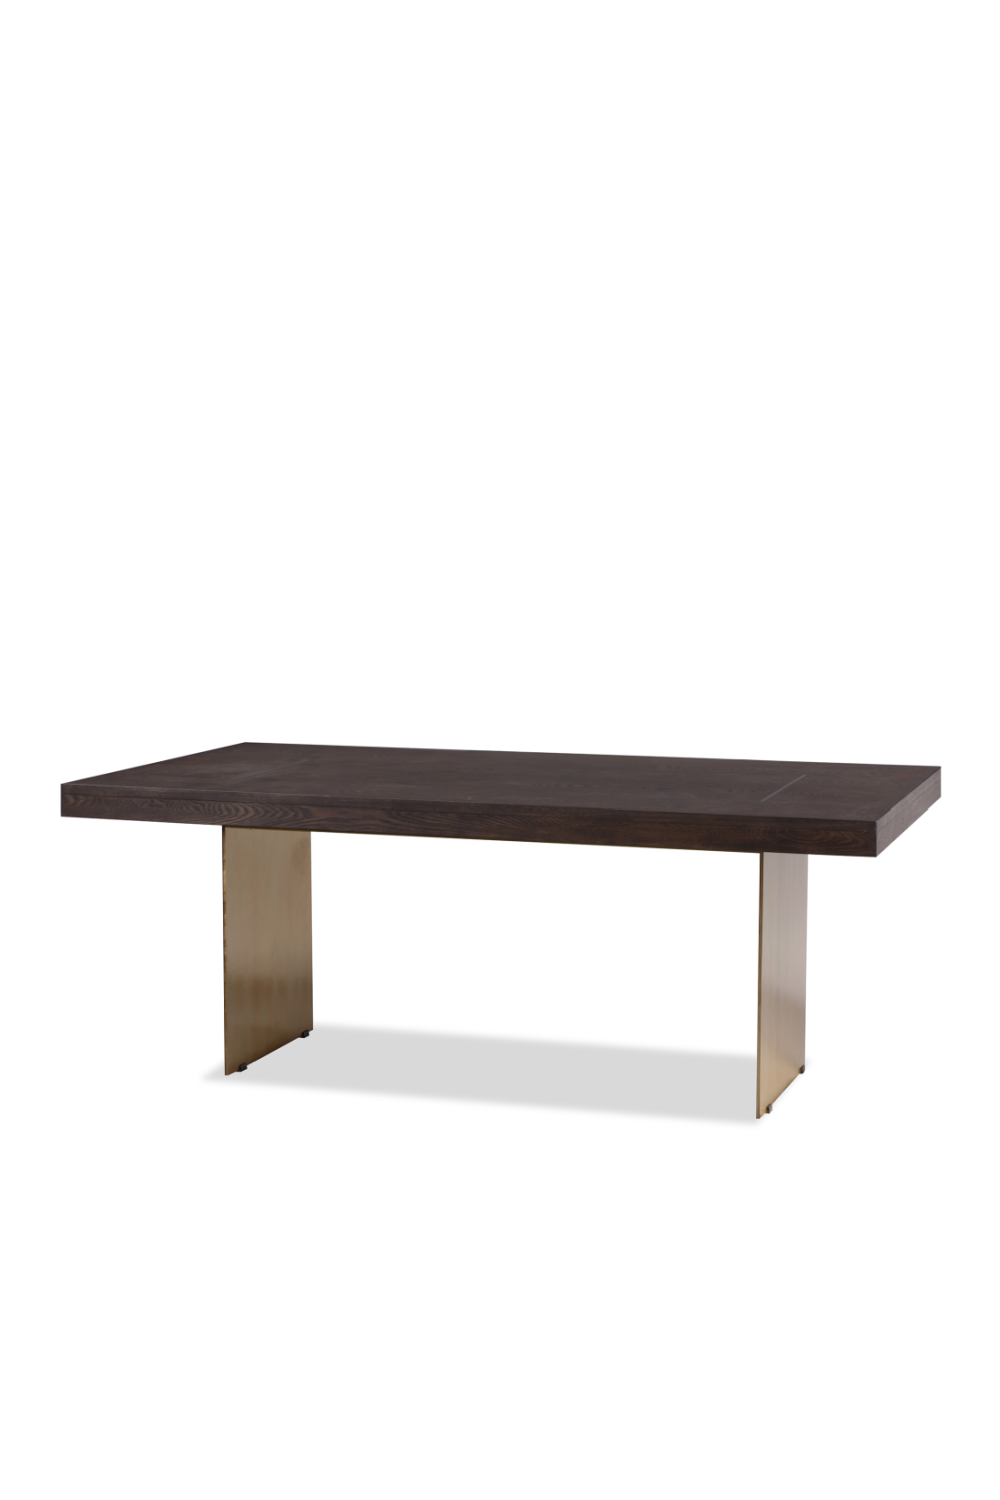 Ash Brass Dining Table | Liang & Eimil Unma | Oroa.com